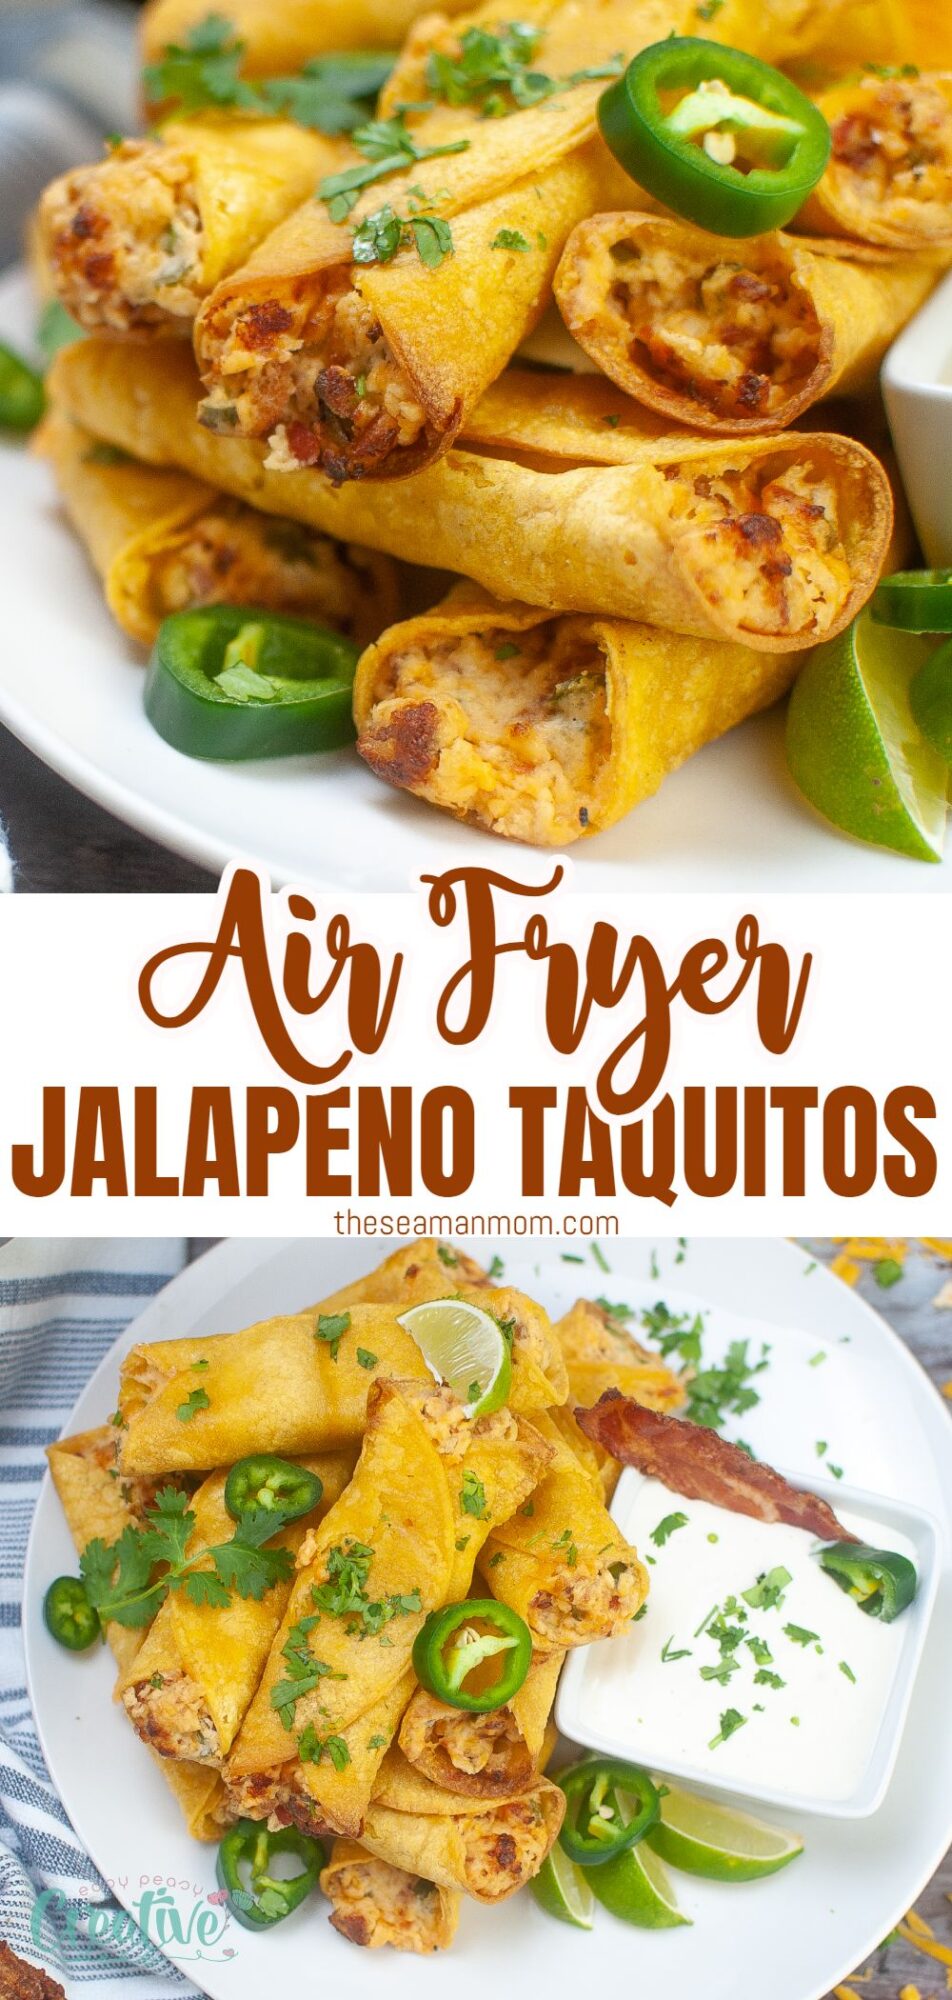 Spicy jalapeno cream cheese taquitos: creamy cheese, tangy jalapenos, crispy shell. Perfect balance of spice and smoothness in every bite!